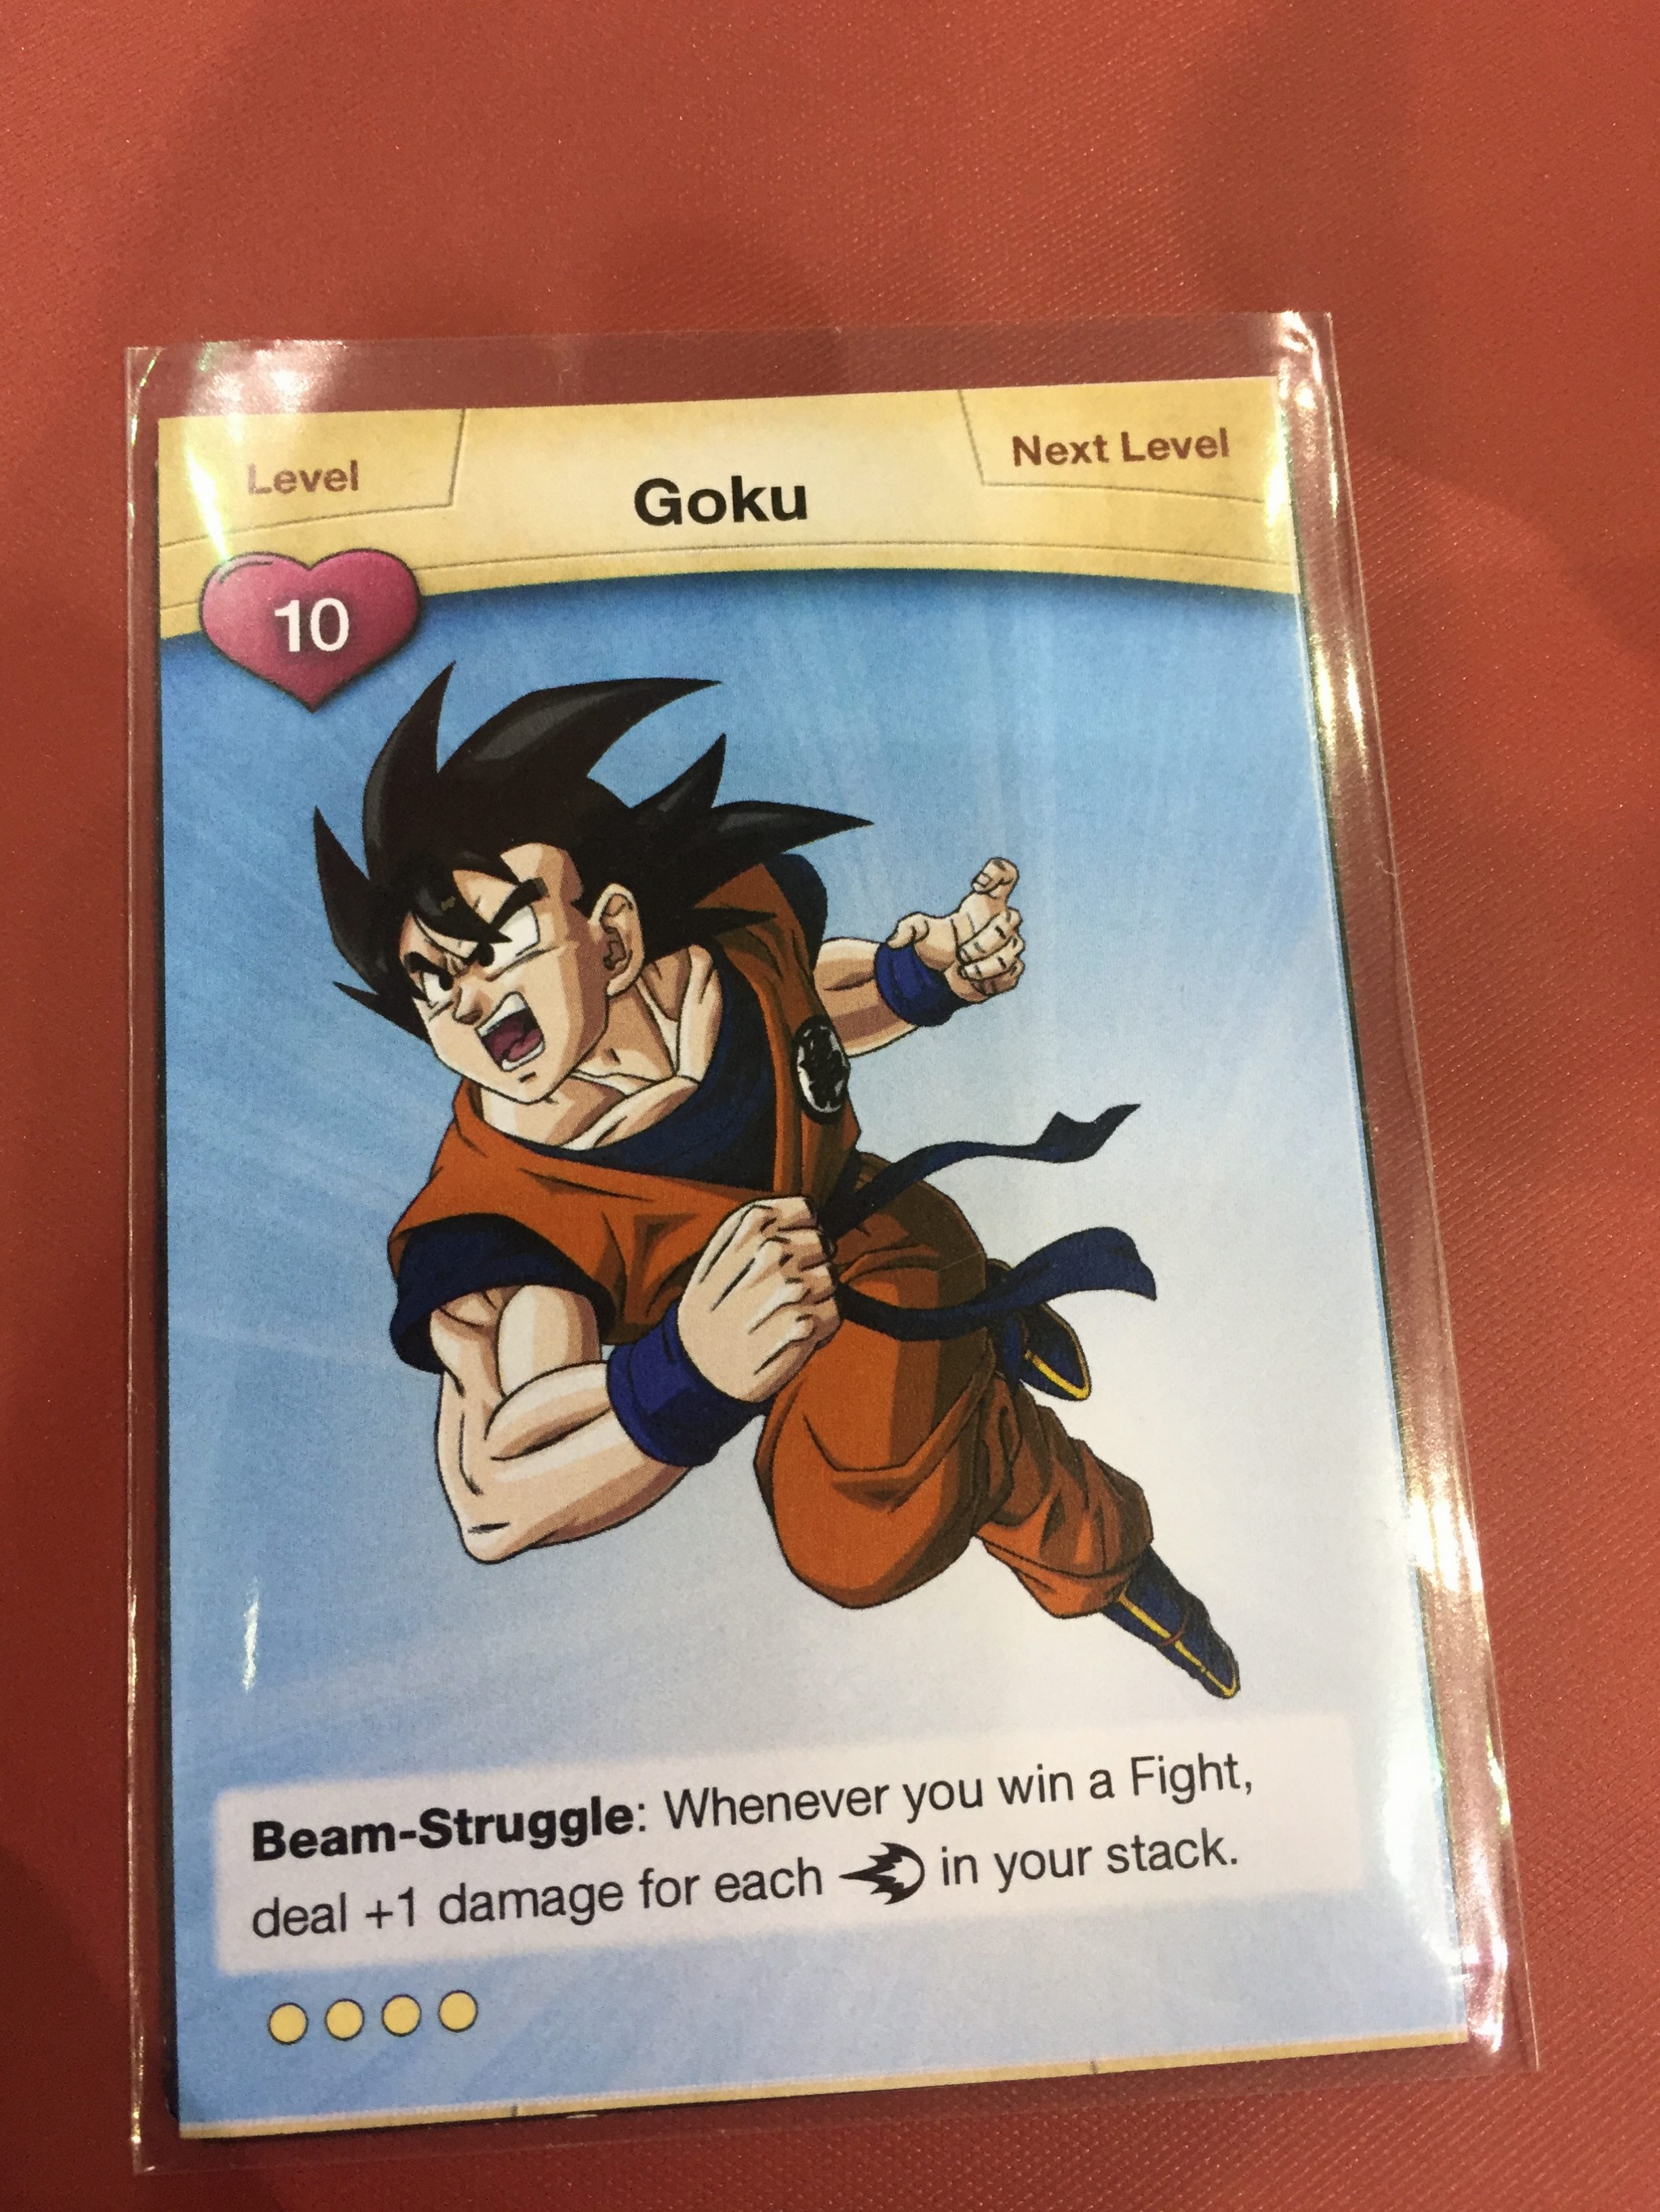 DRAGON BALL SUPER CARD GAME is moving to the next level! 